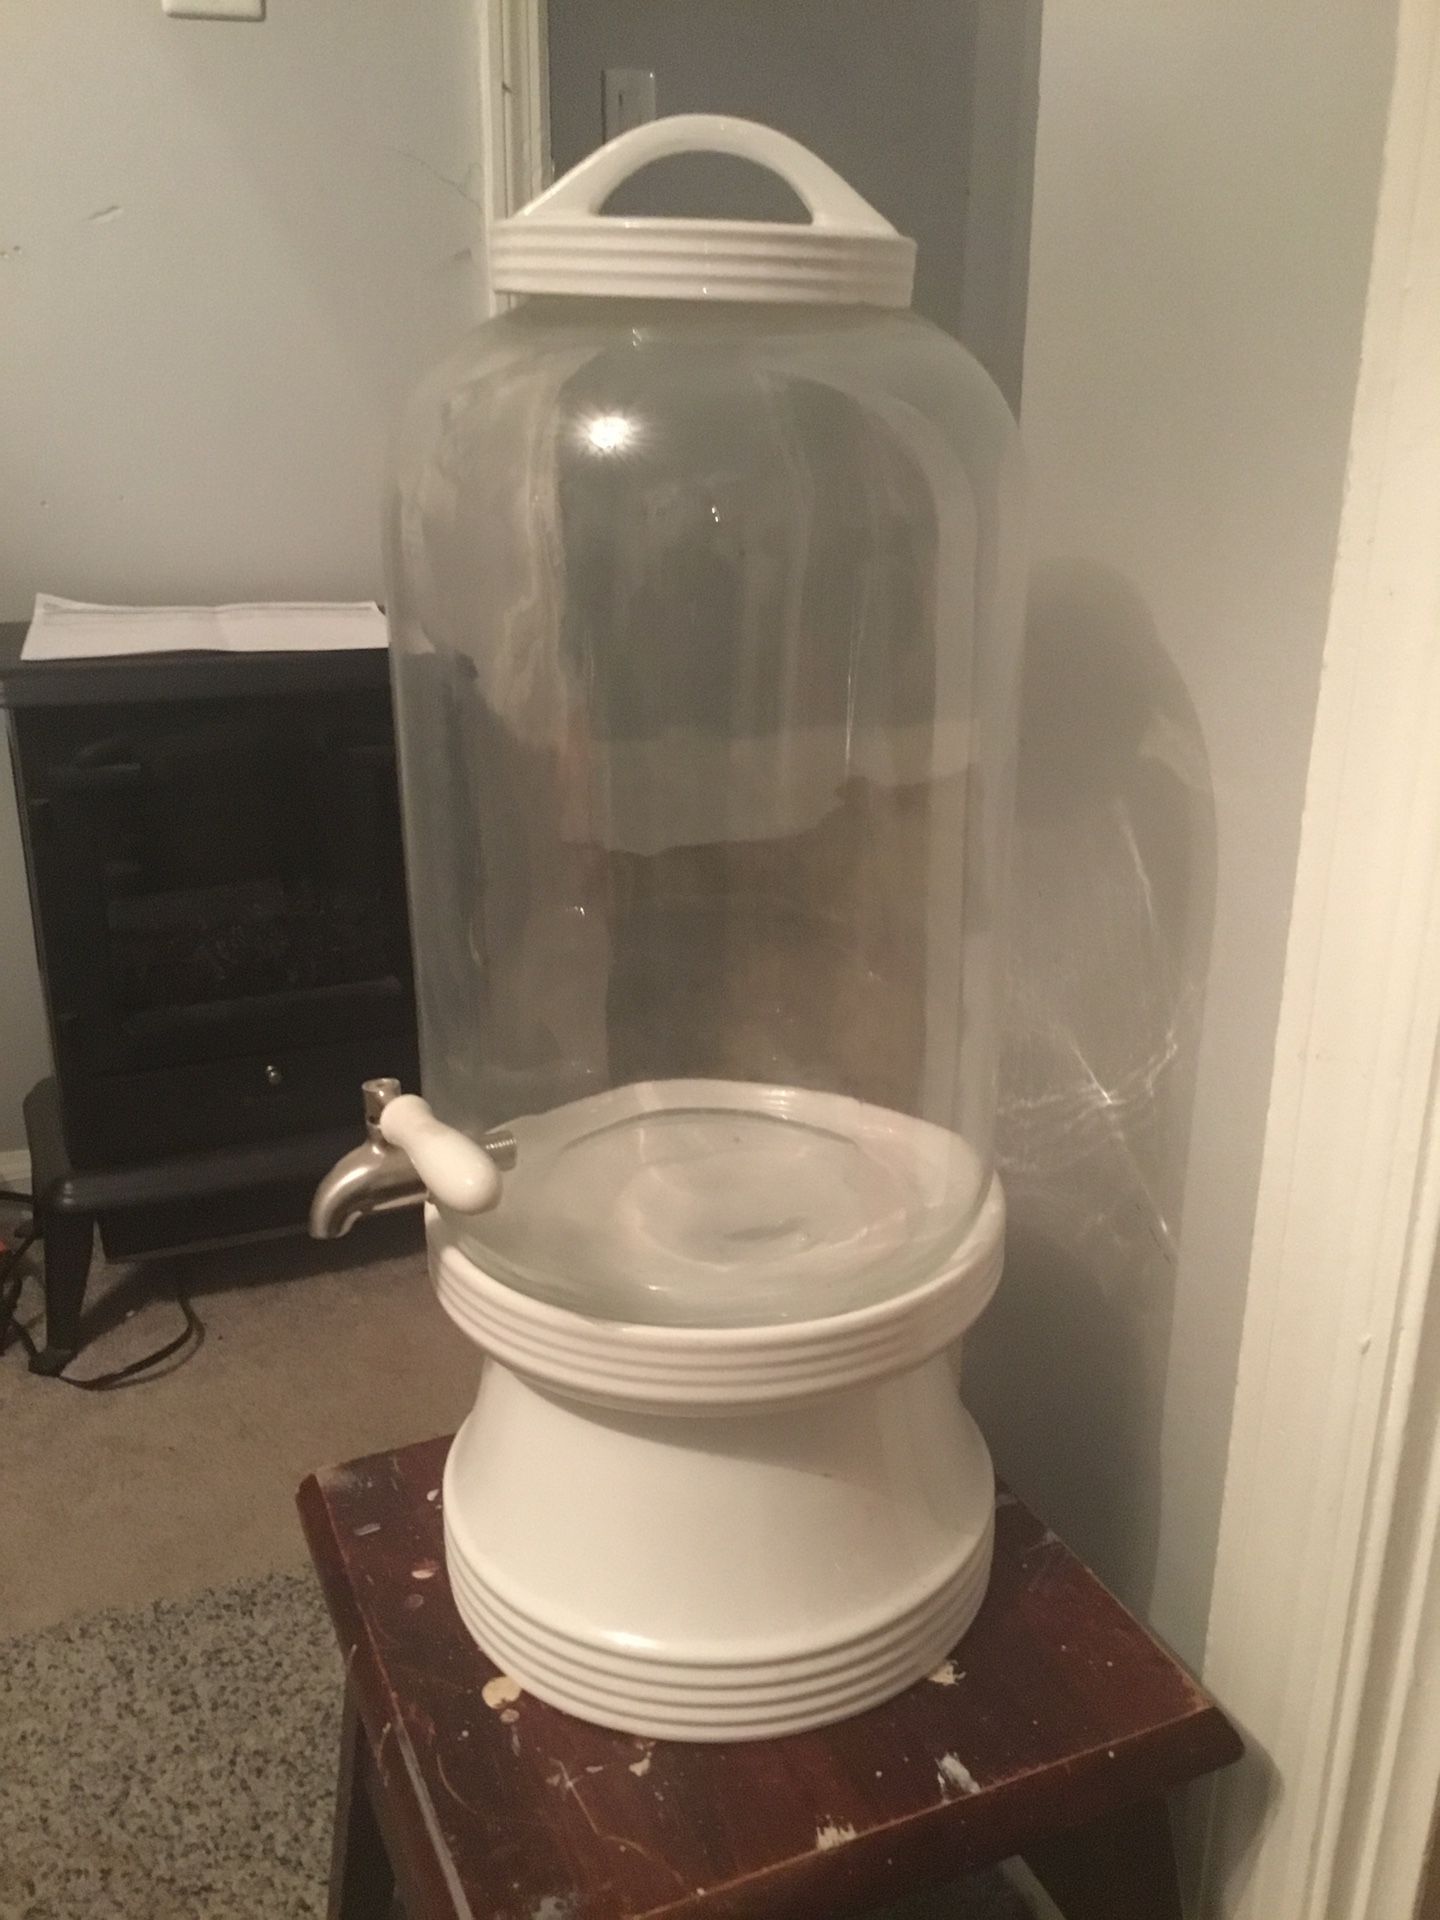 Water/Fluid Container With Spout